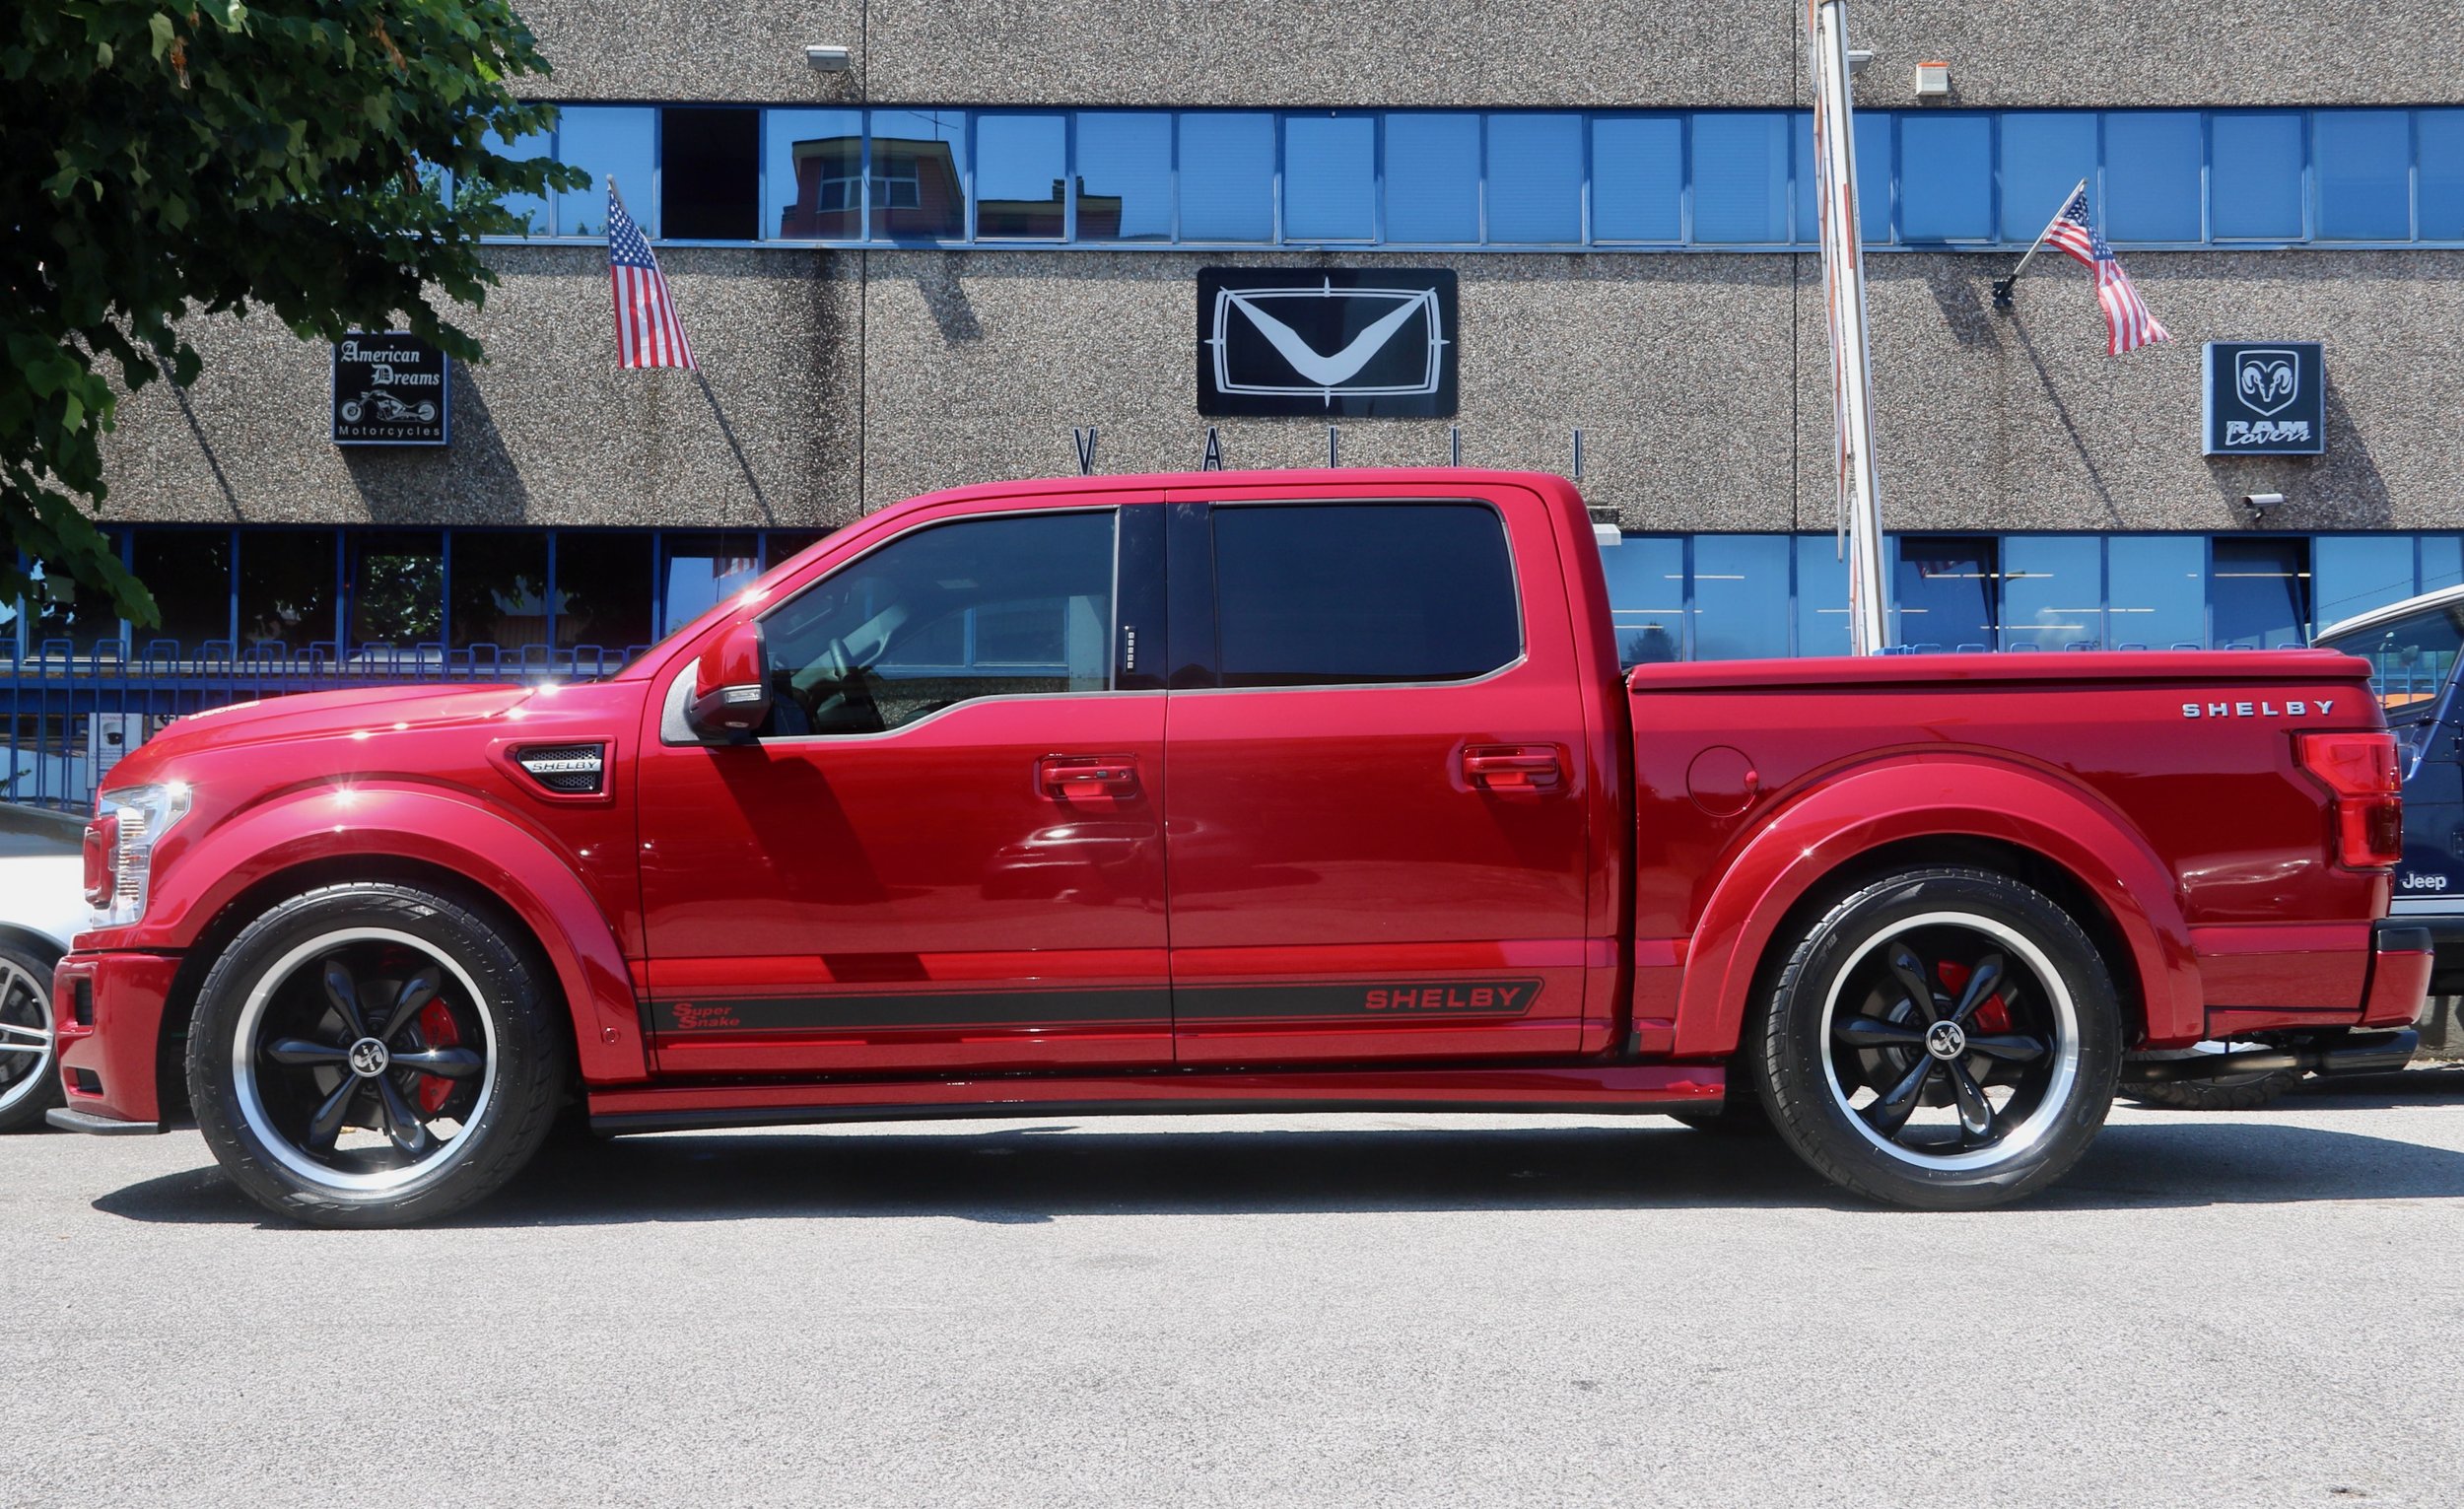 06 2020 Ford F150 Shelby Super Snake C.S.M. 20STS0259 Rapid Red VALLIstore Wide-Body.jpeg